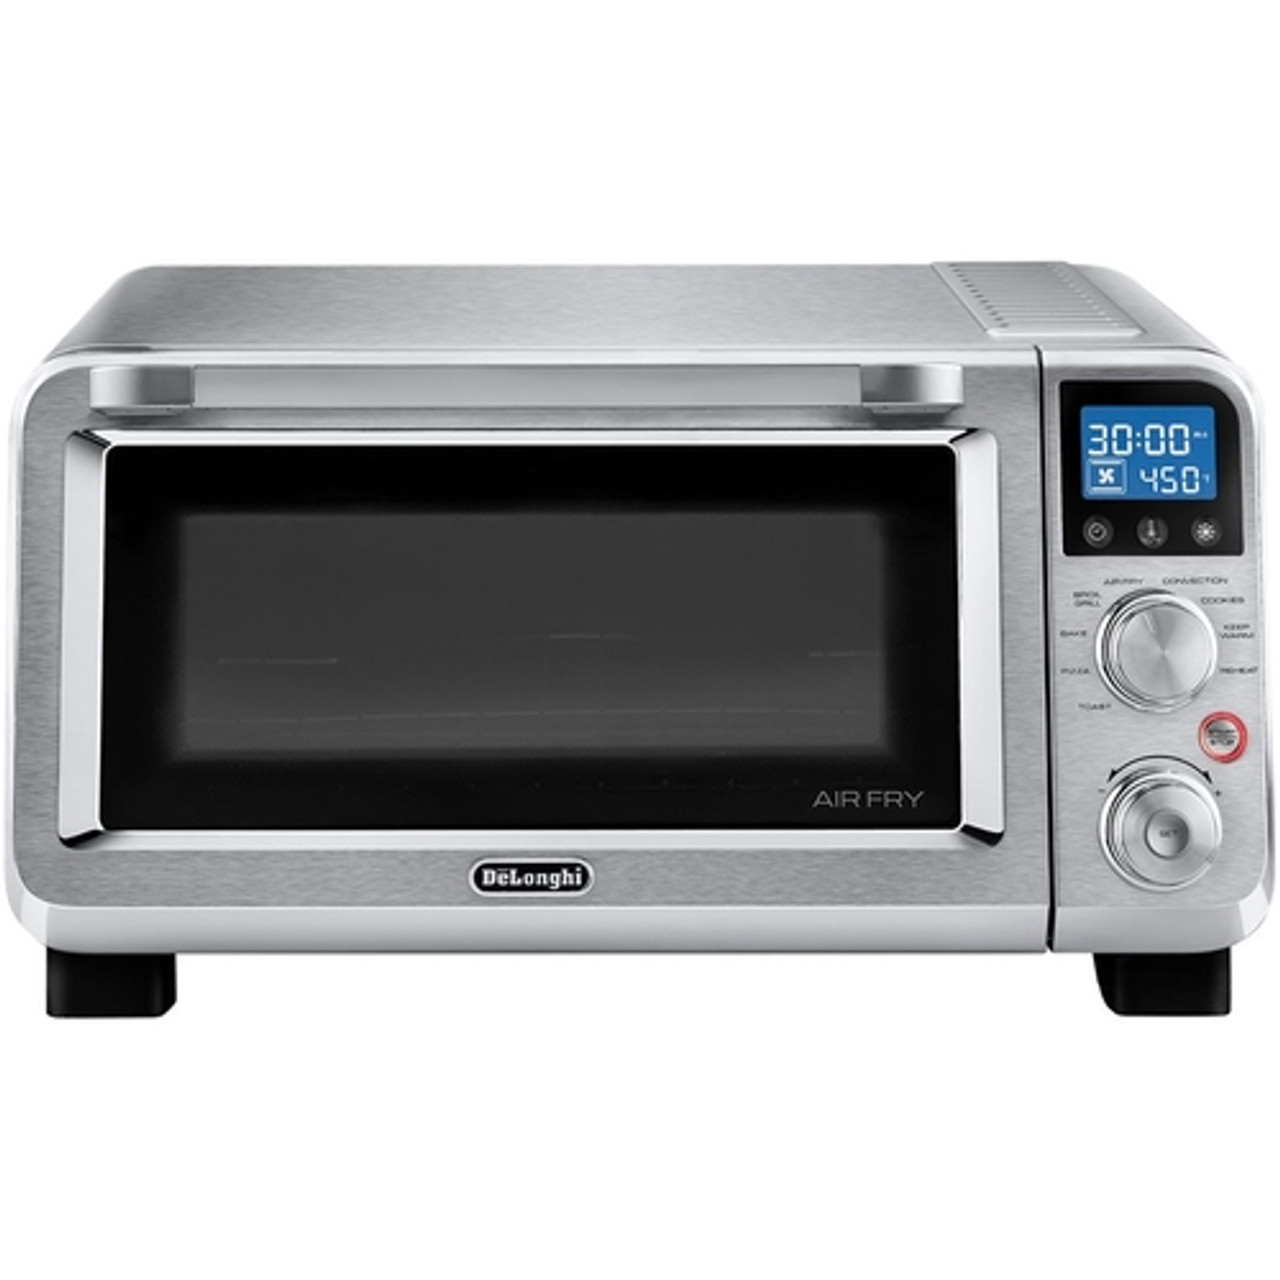 DeLonghi - Livenza 6-Slice Toaster Oven - Stainless Steel